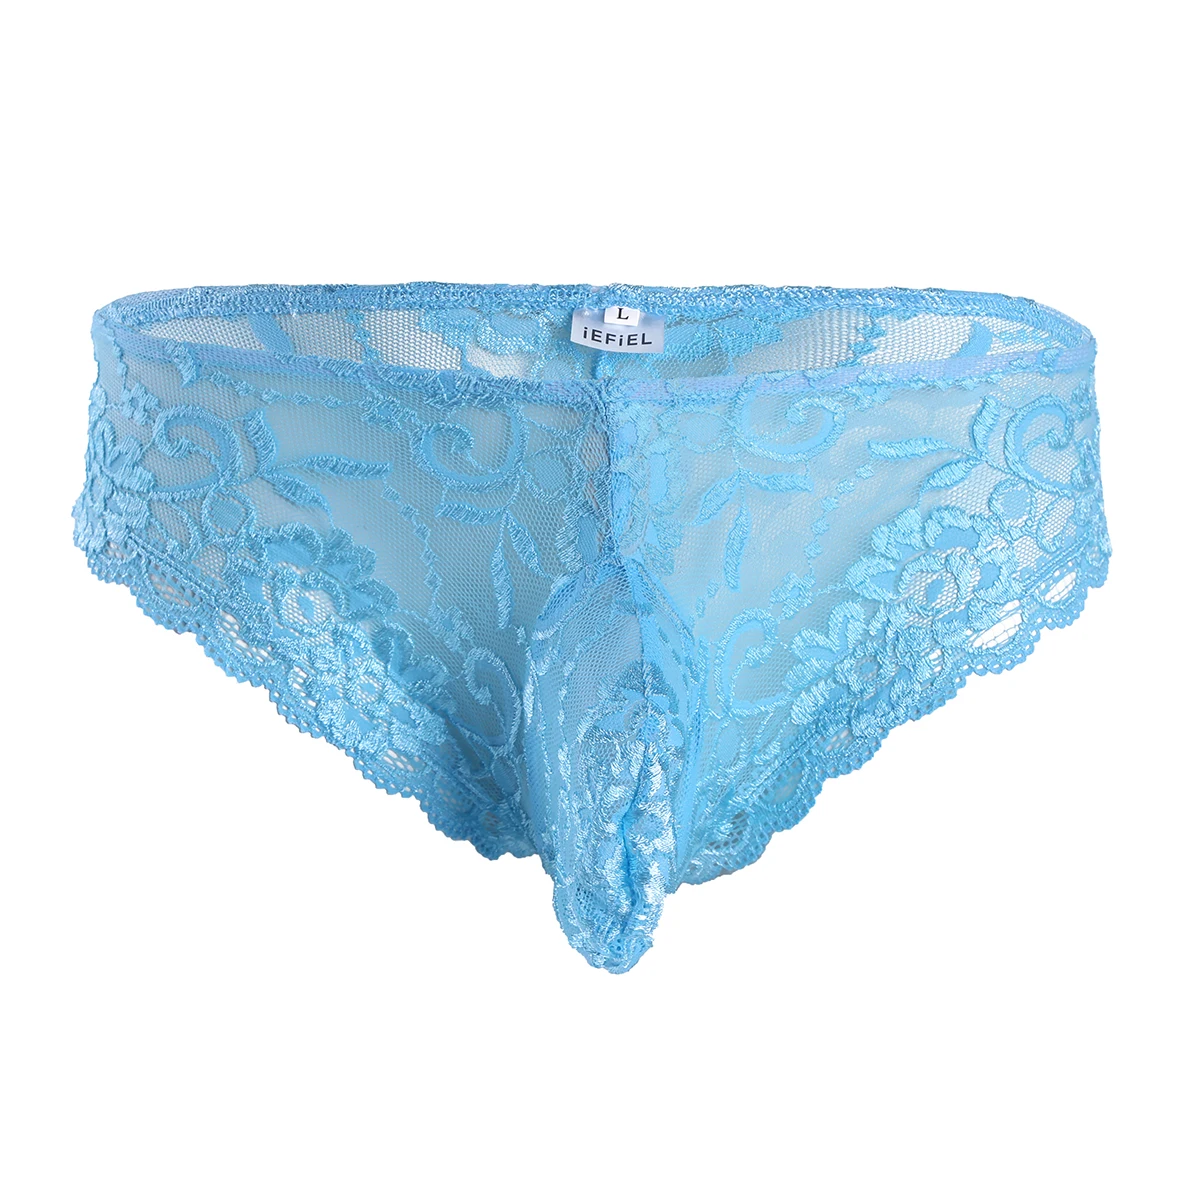 

Sexy Mens Sissy Pouch Panties Lingerie Gay Male Full Lace Crossdress Briefs Low Rise See Through Jockstrap Underwear Underpants